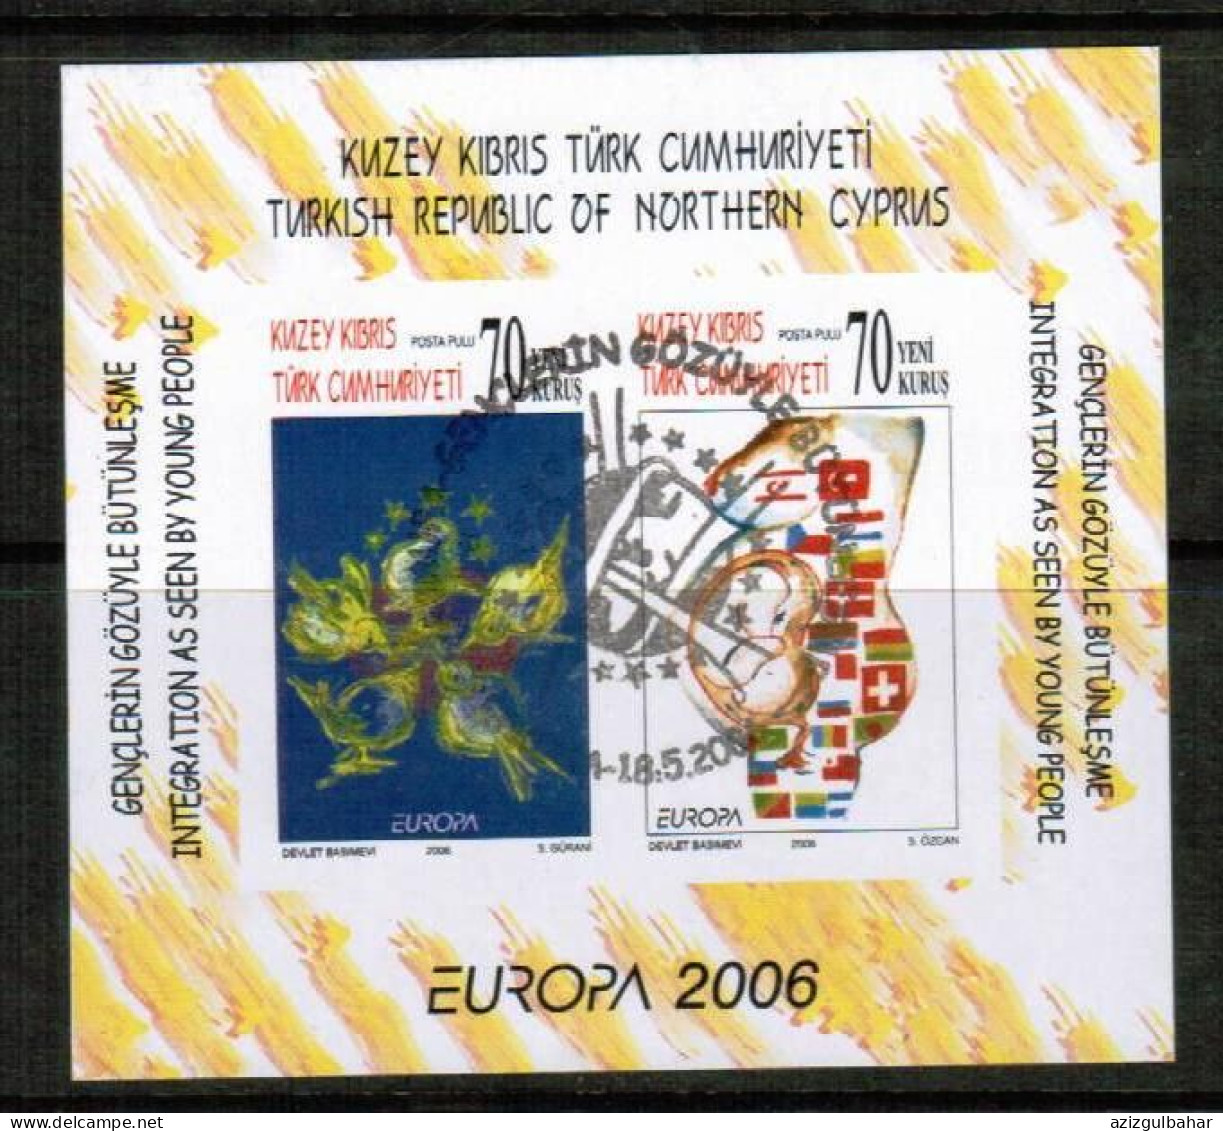 2006 - EUROPA  - INTEGRATION AS SEEN BY YOUR PEOPLE -  TURKISH CYPRIOT STAMPS - USED BLOCK - Oblitérés